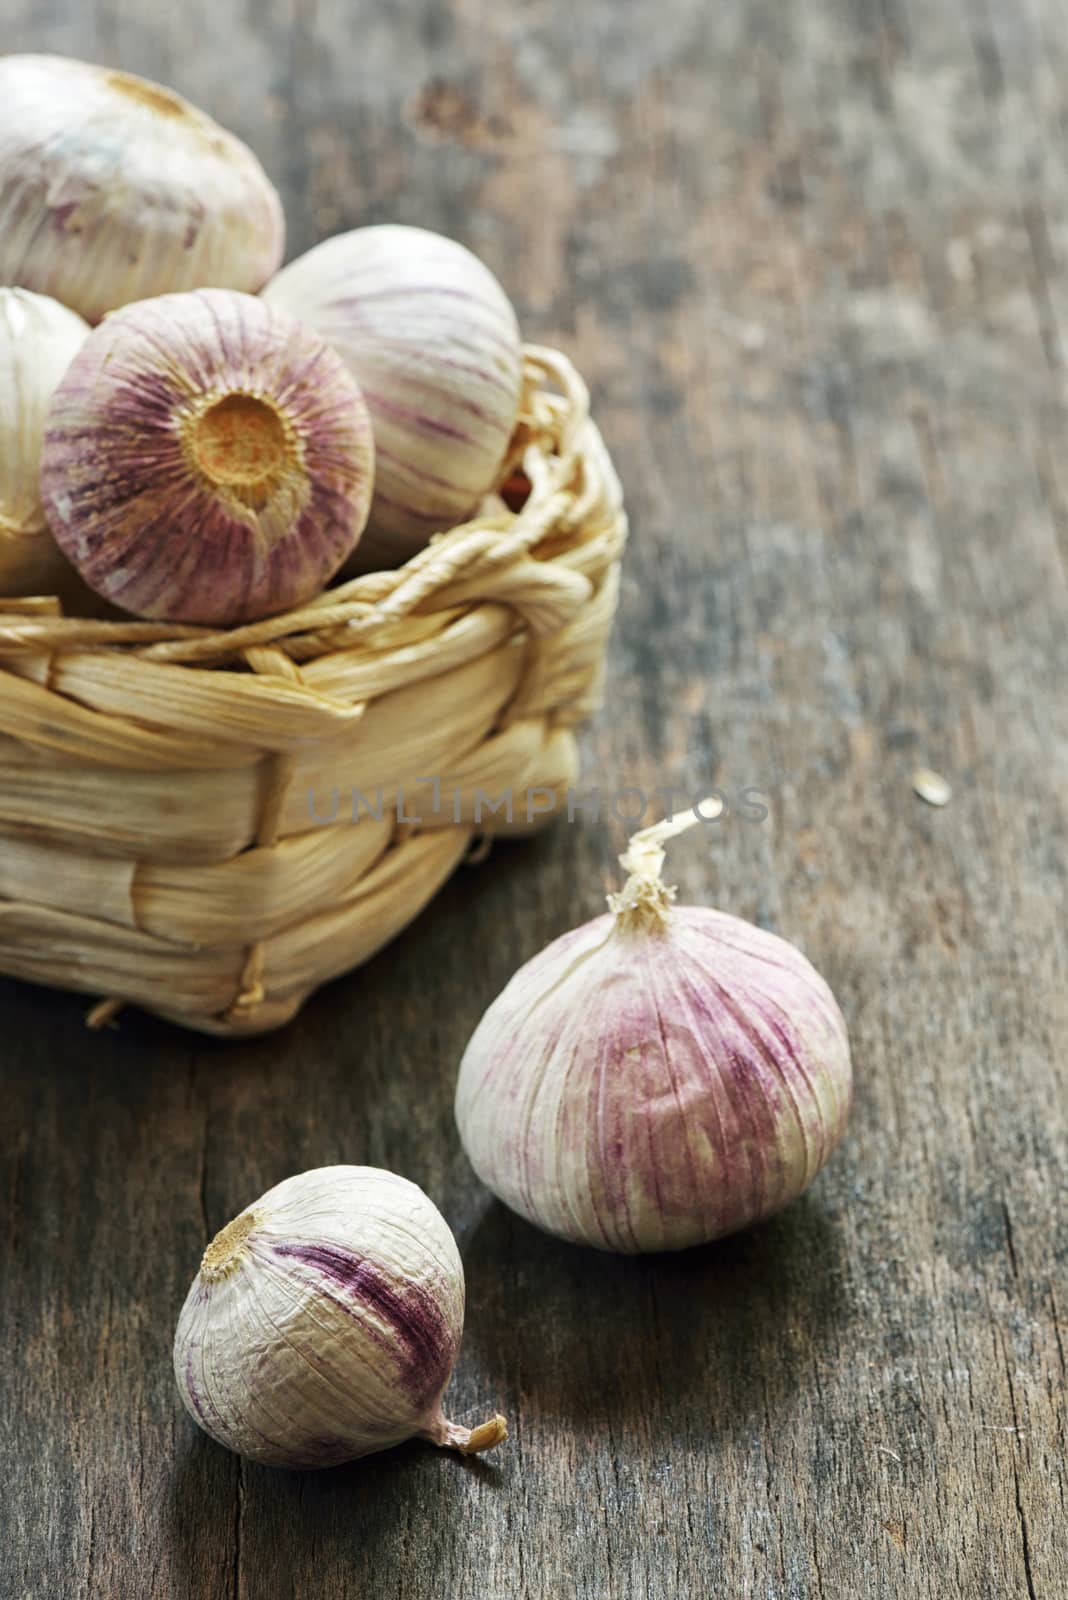 Fresh purple garlic in a small straw basket on old wooden table